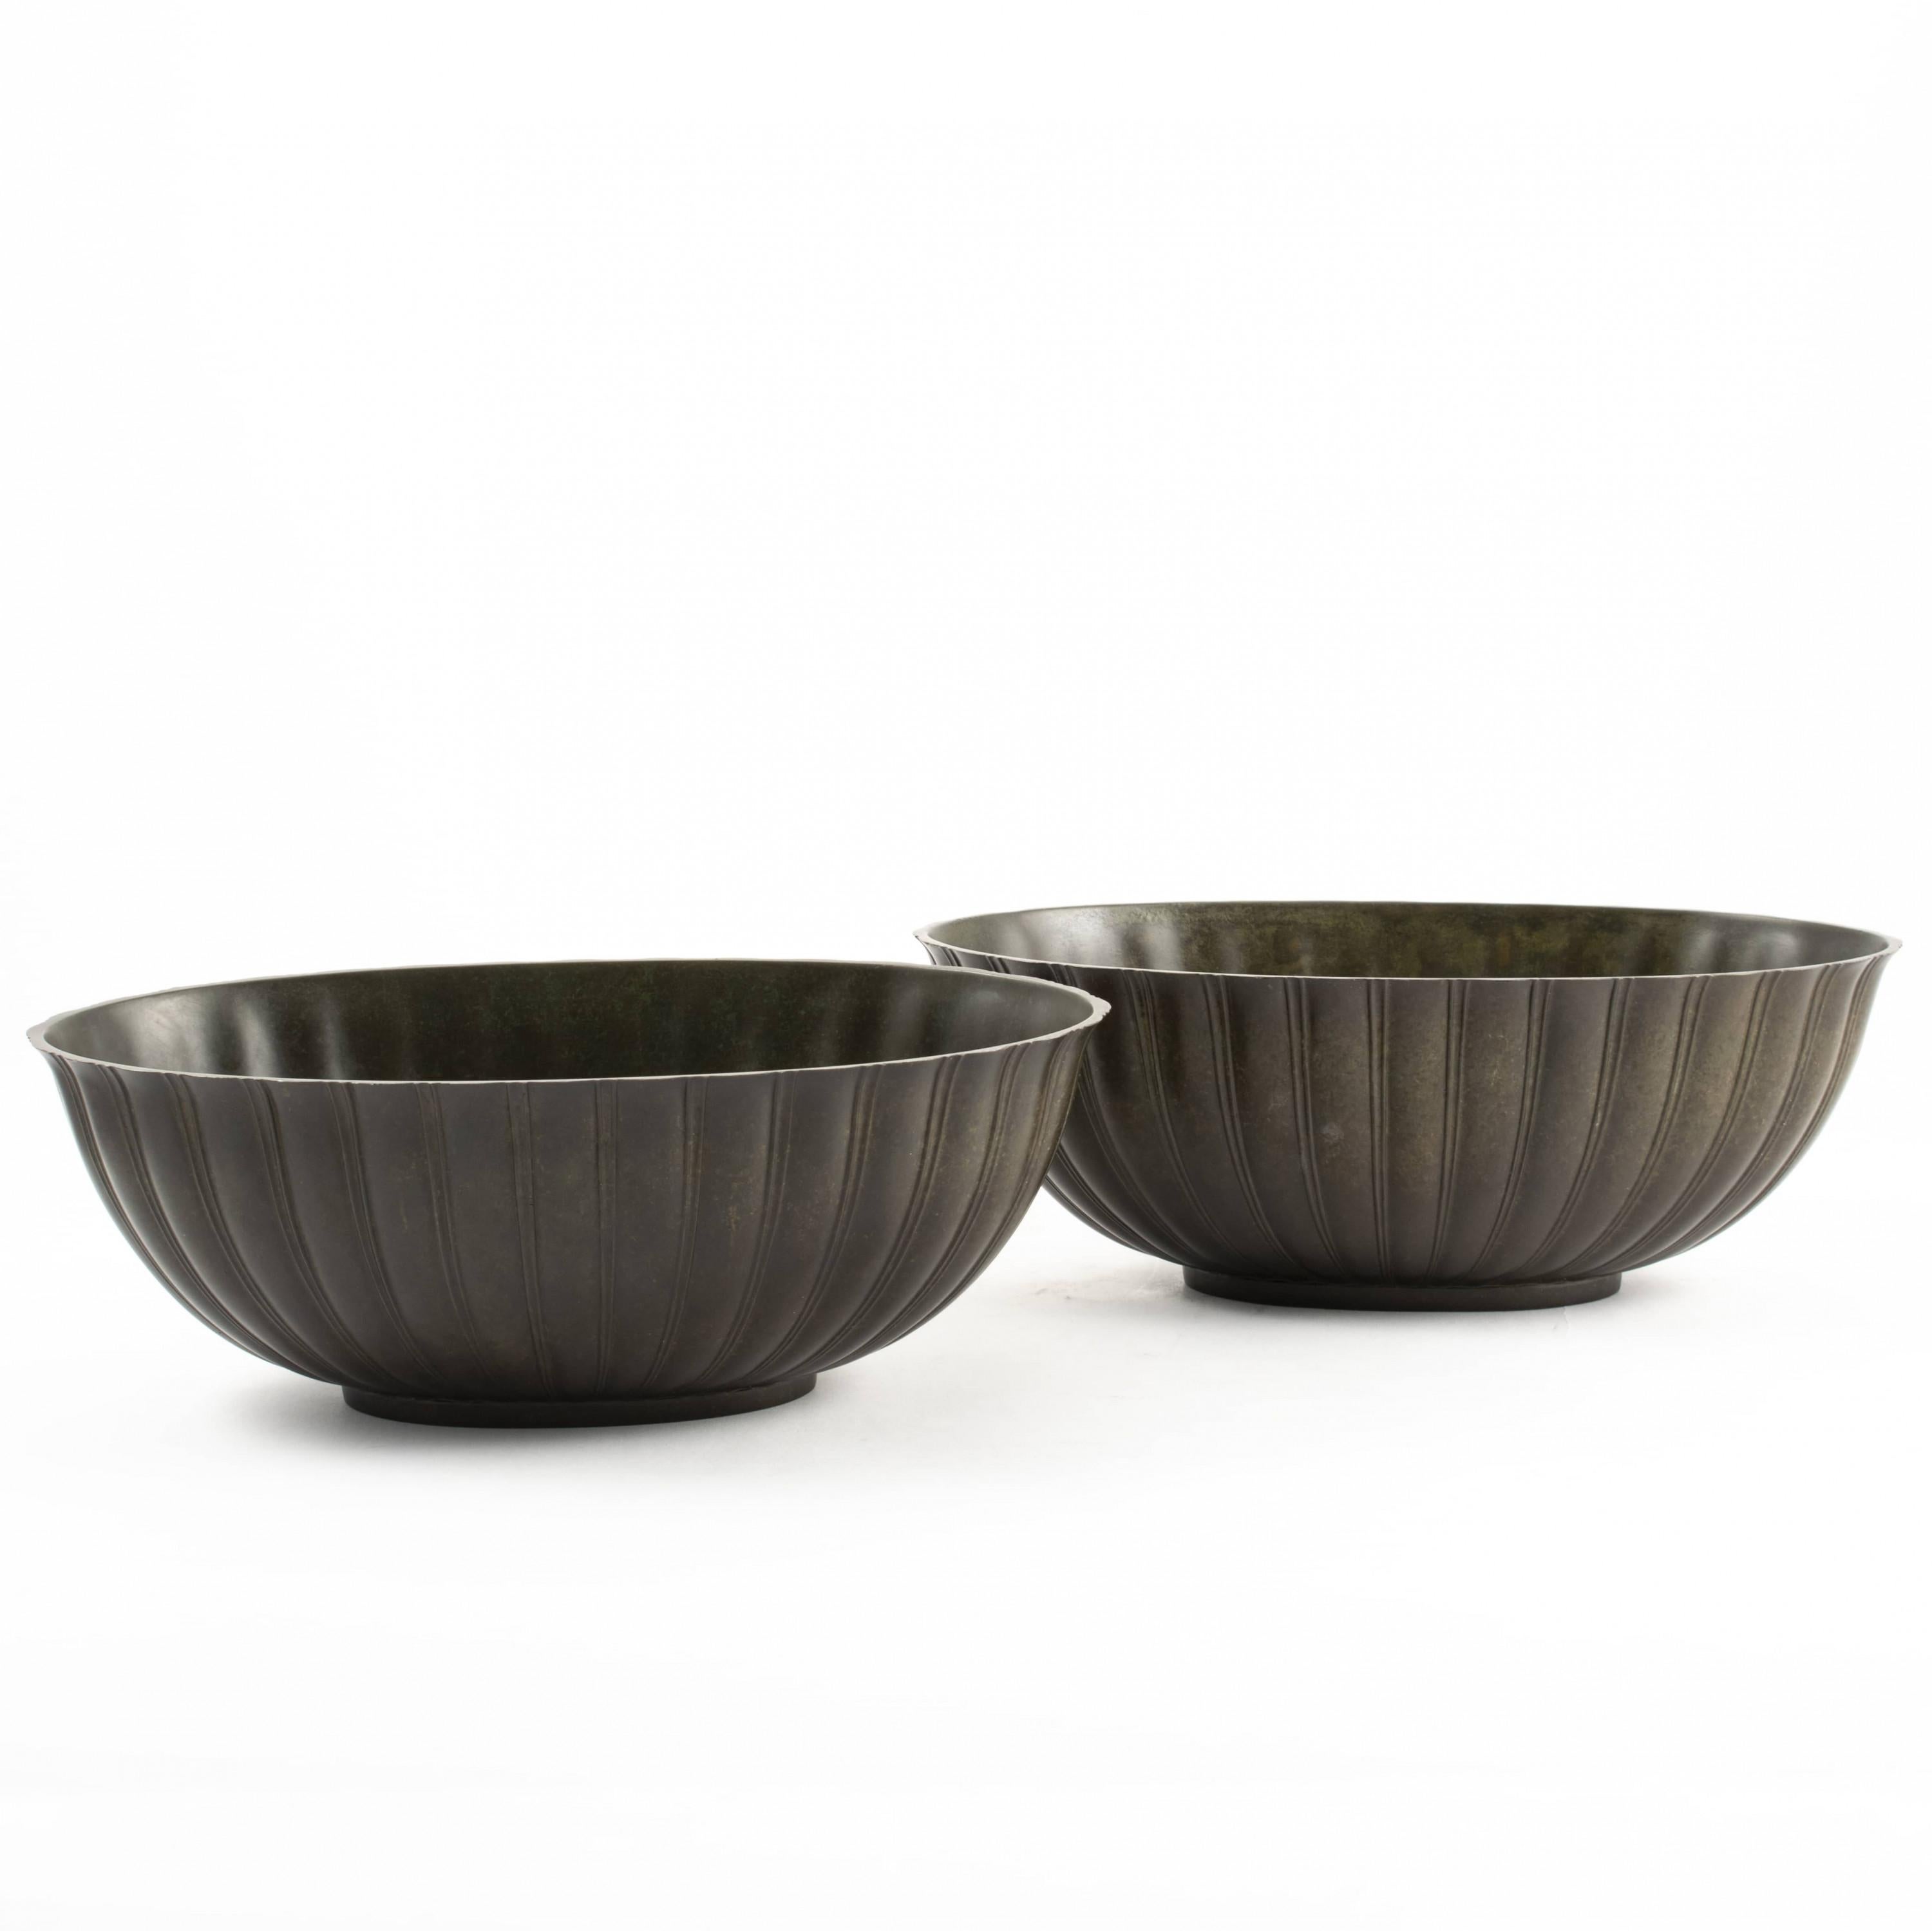 Pair of art deco bowls / jardinières designed by Just Andersen.
Made in Disko metal, a metal specifically invented by Just Andersen by combining lead and antimony, with a dark patina.
Stamped and numbered JUST 1752 to base.

Denmark, c.